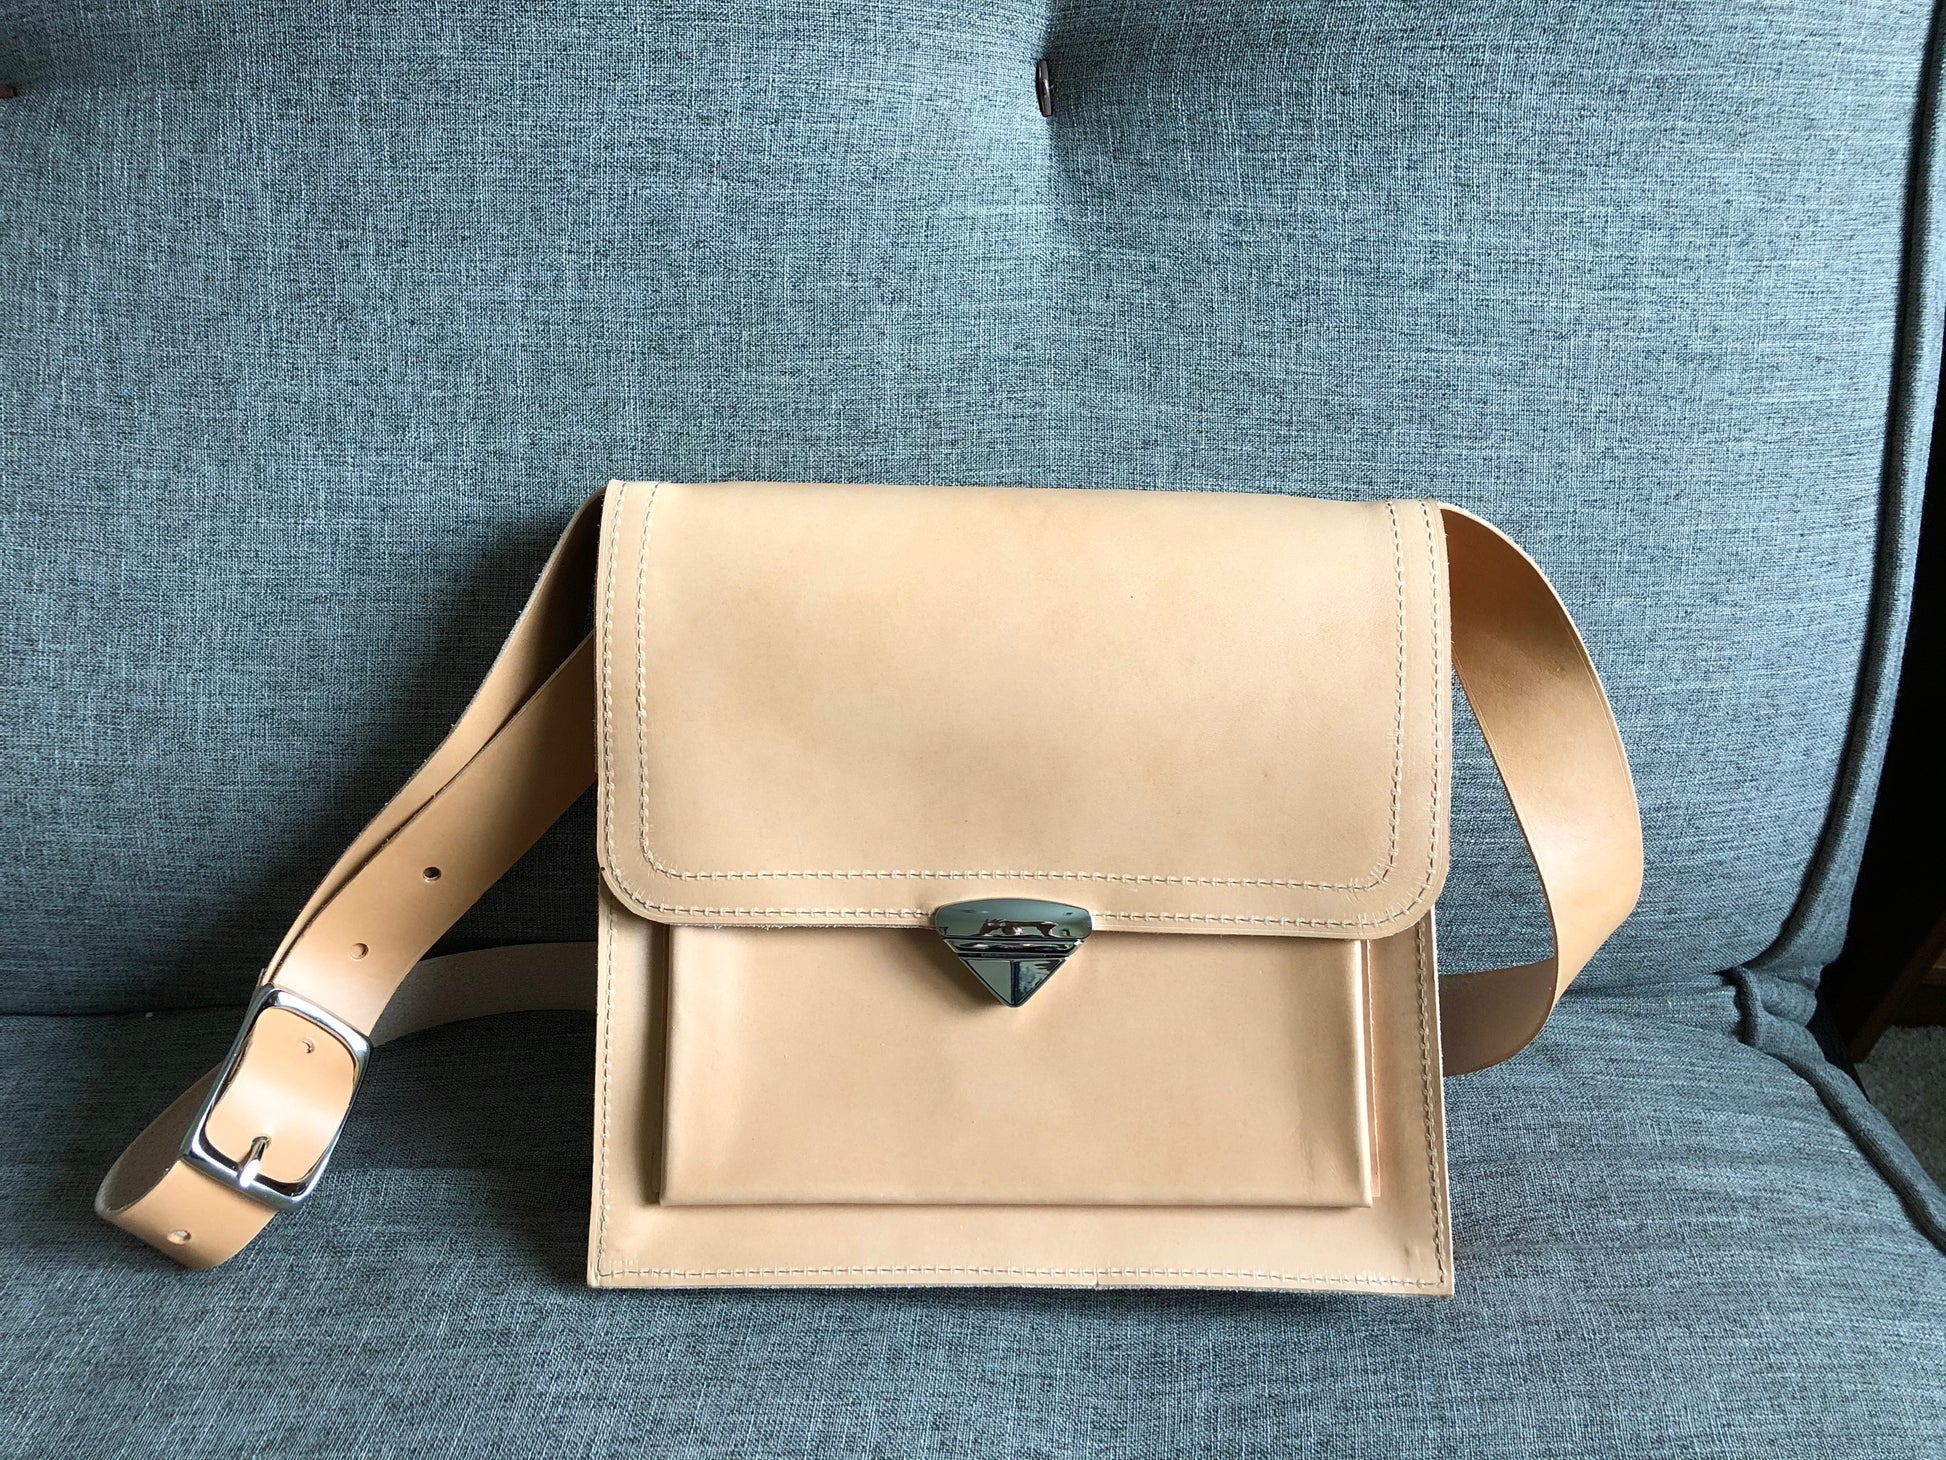 Nude leather crossbody bag sits on a couch.